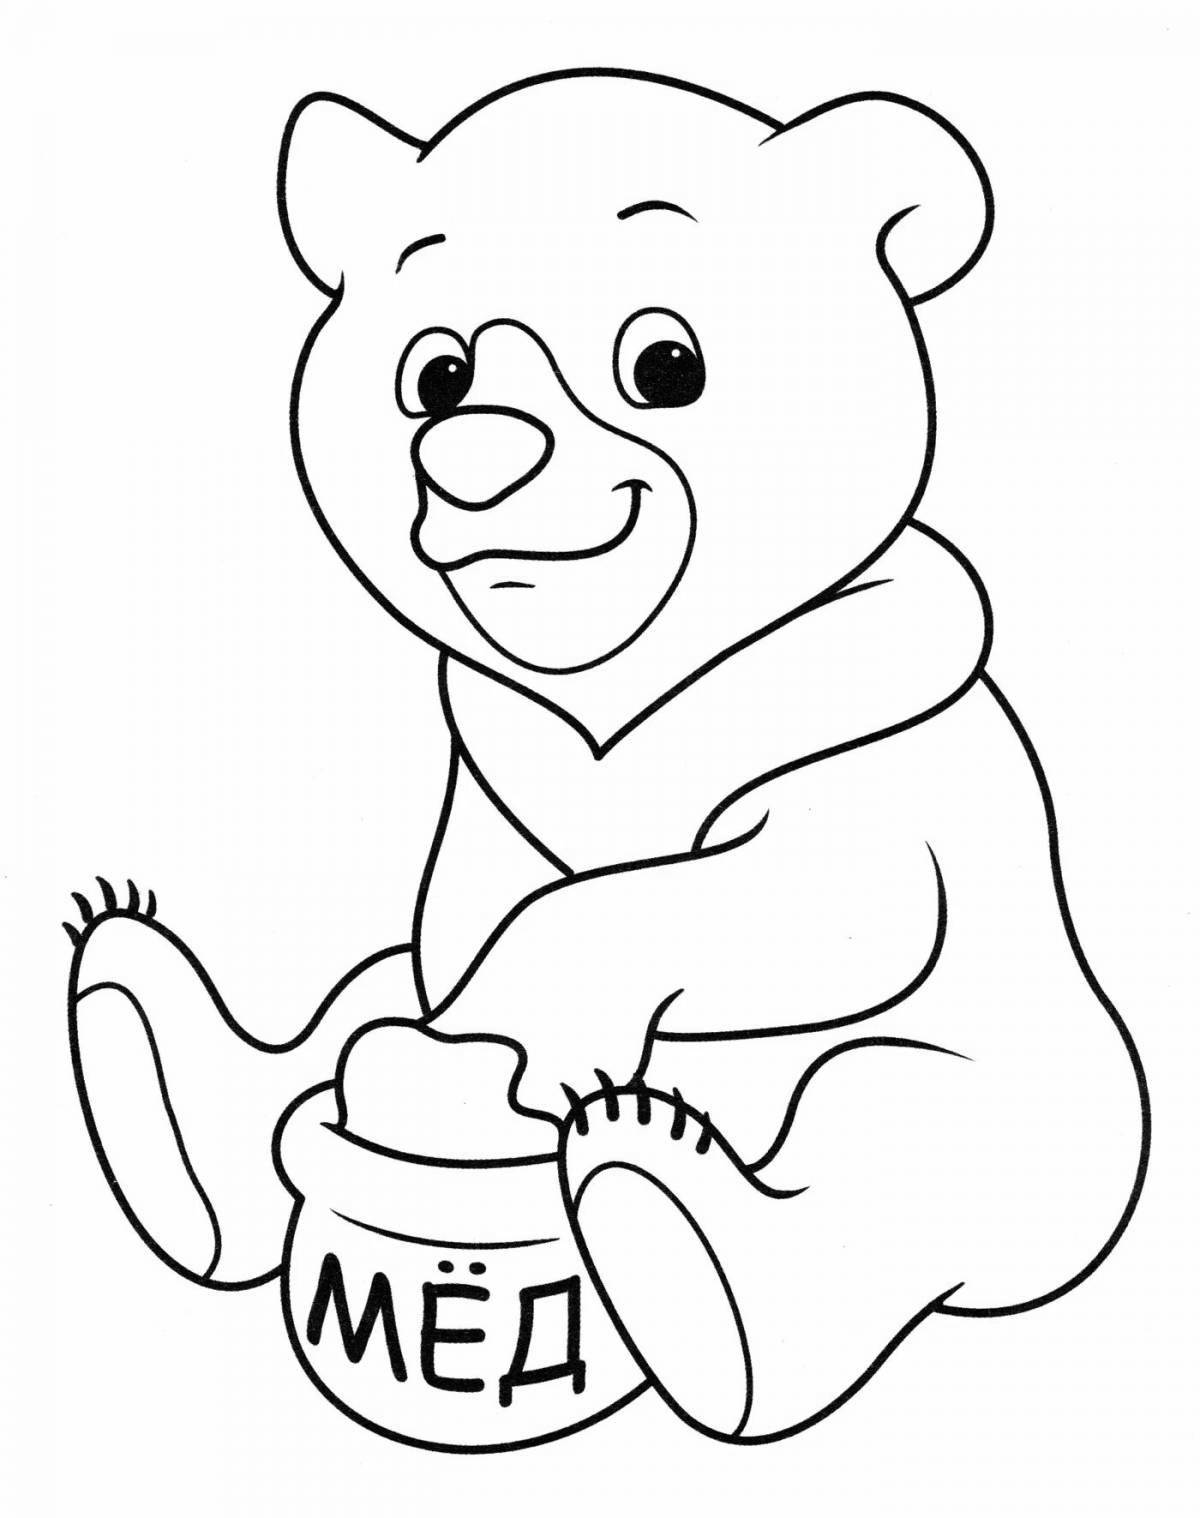 Color fantasy bear coloring book for children 3-4 years old